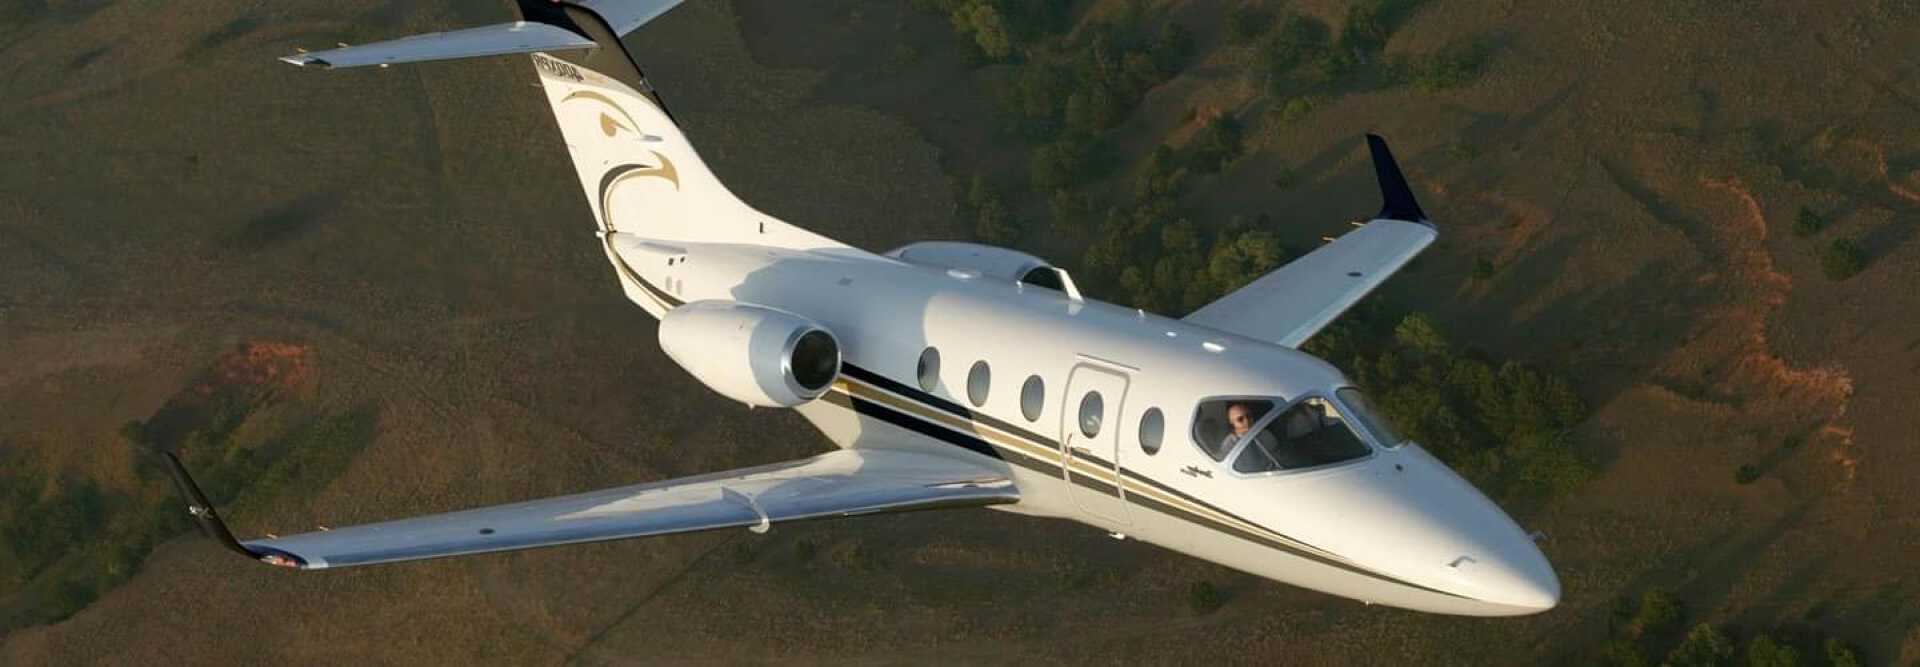 Light Jet Hawker Beechcraft 400XP to charter for private aviation with LunaJets, maximum cruise speed and fuel efficiency on intra-European flights